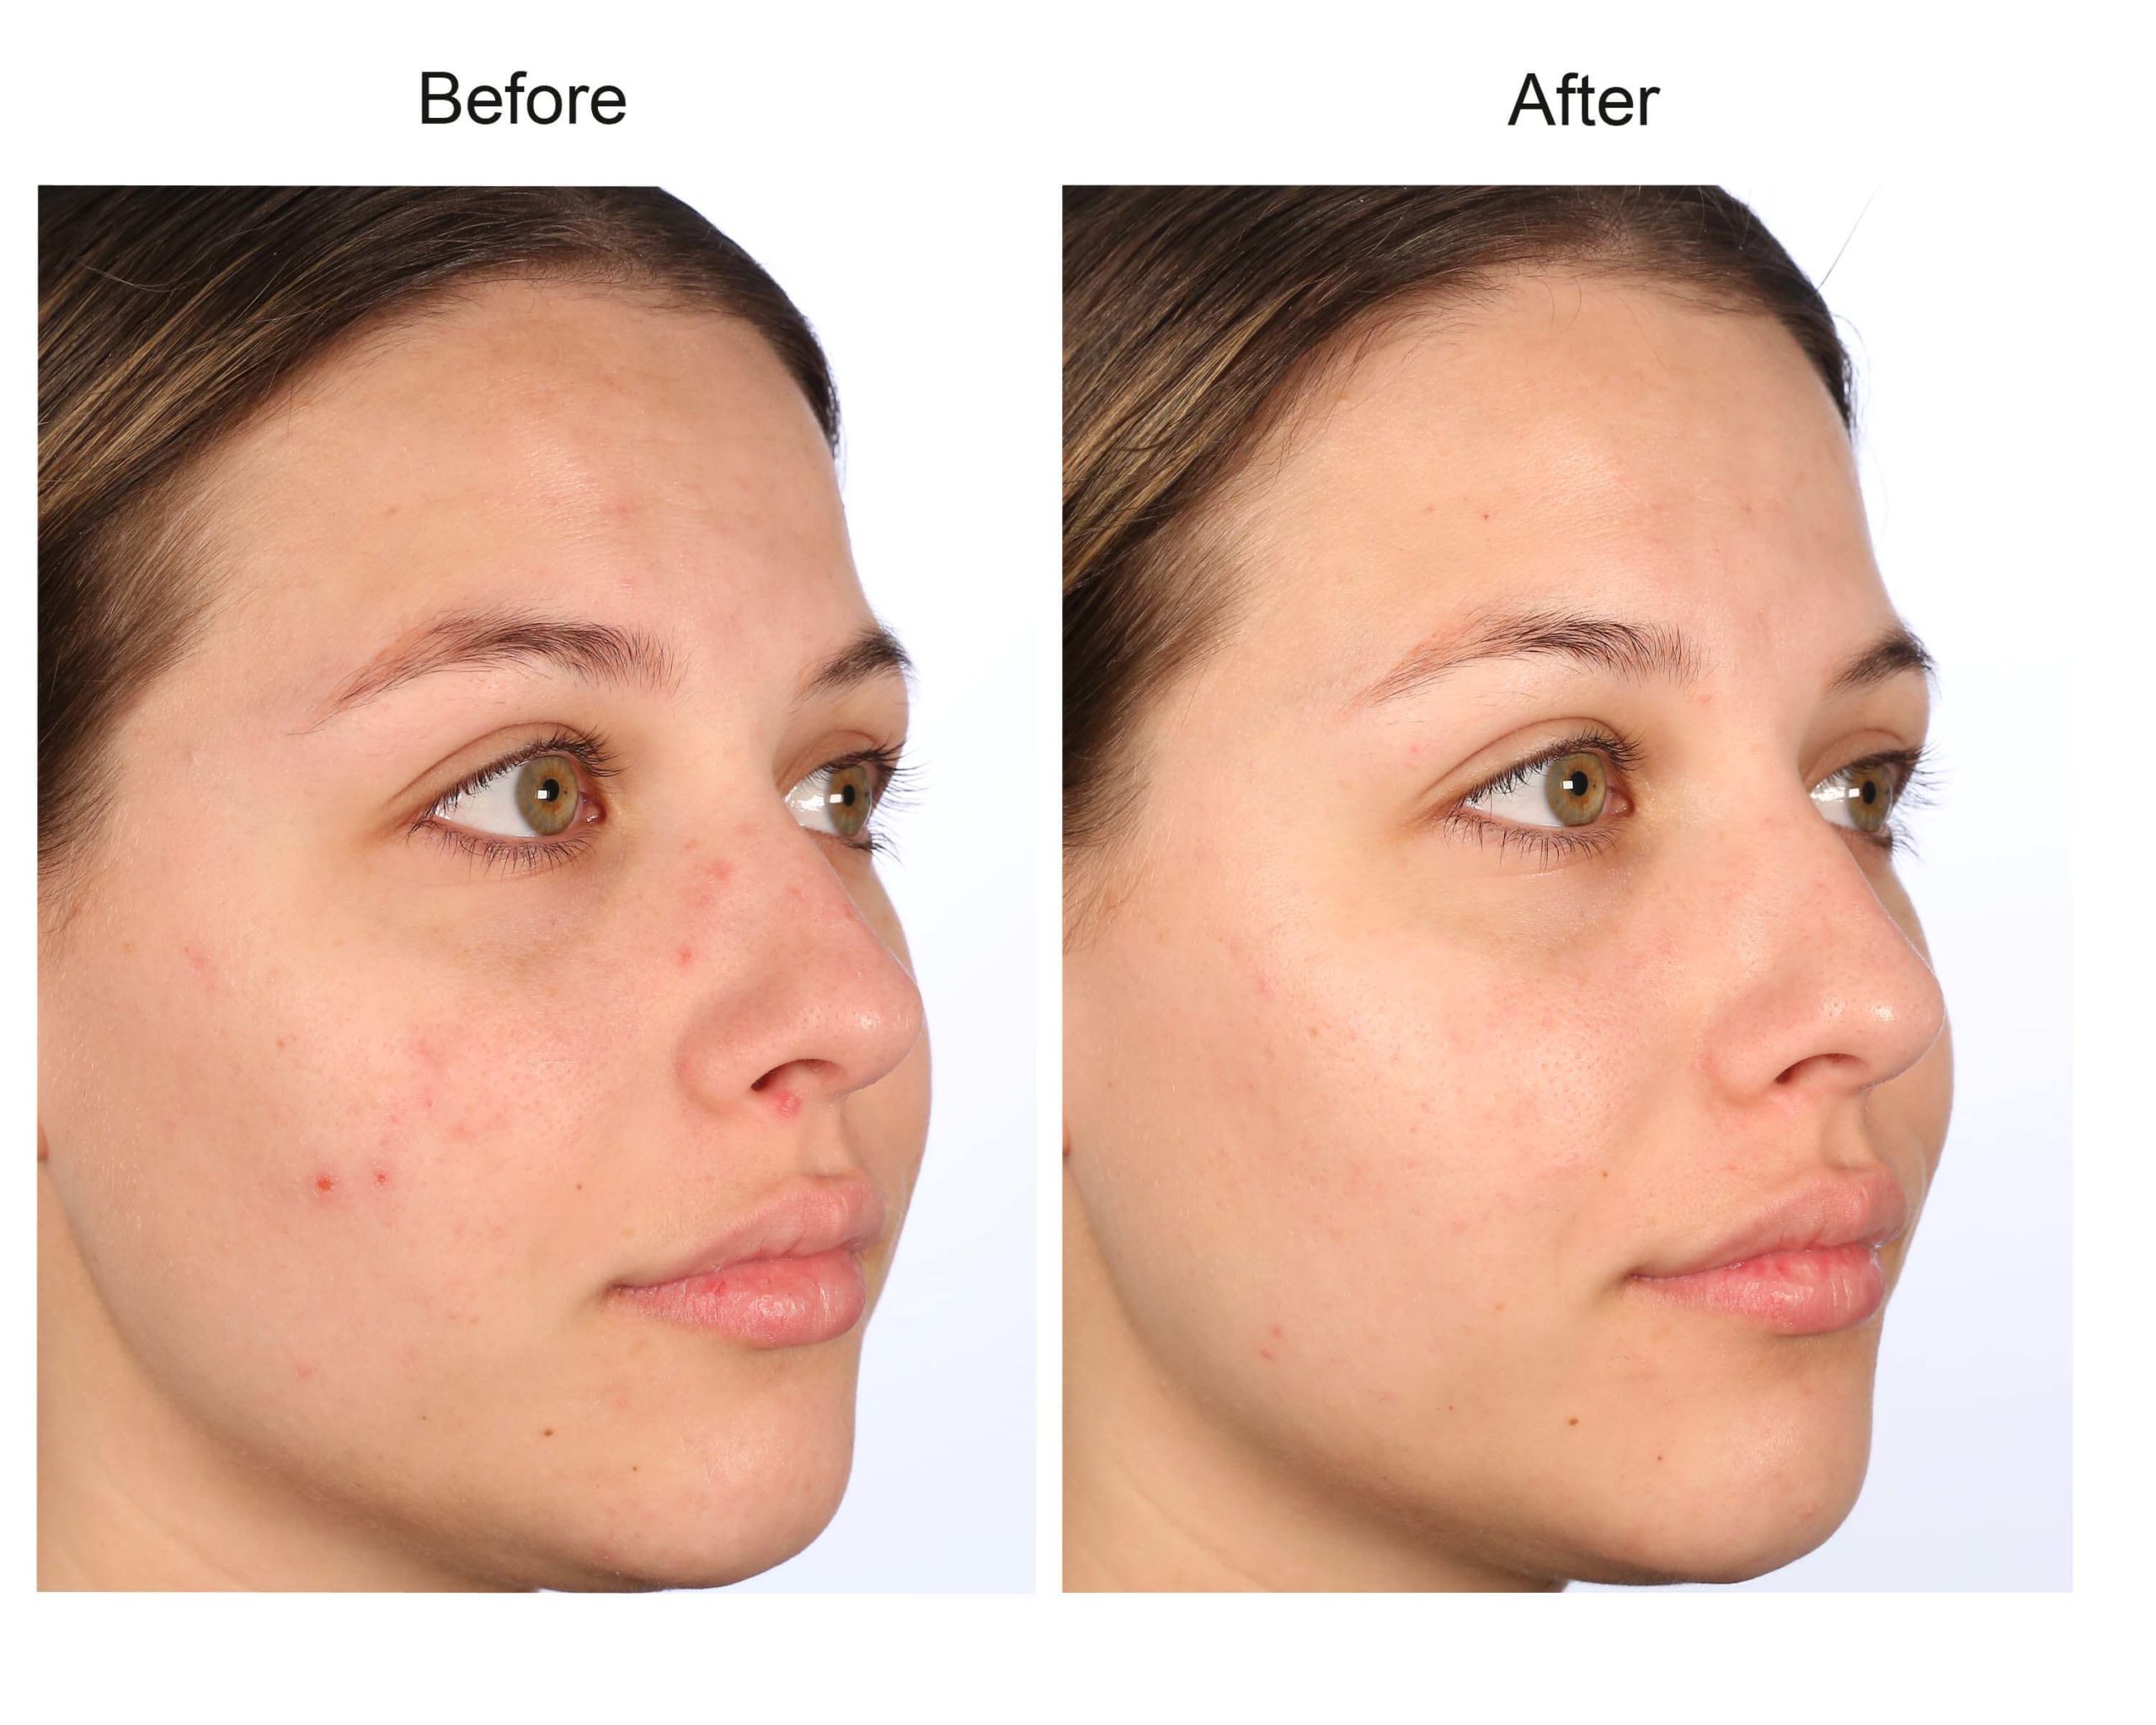 Refresh Skin Therapy – Professional Peels, Powerful Skin Solutions